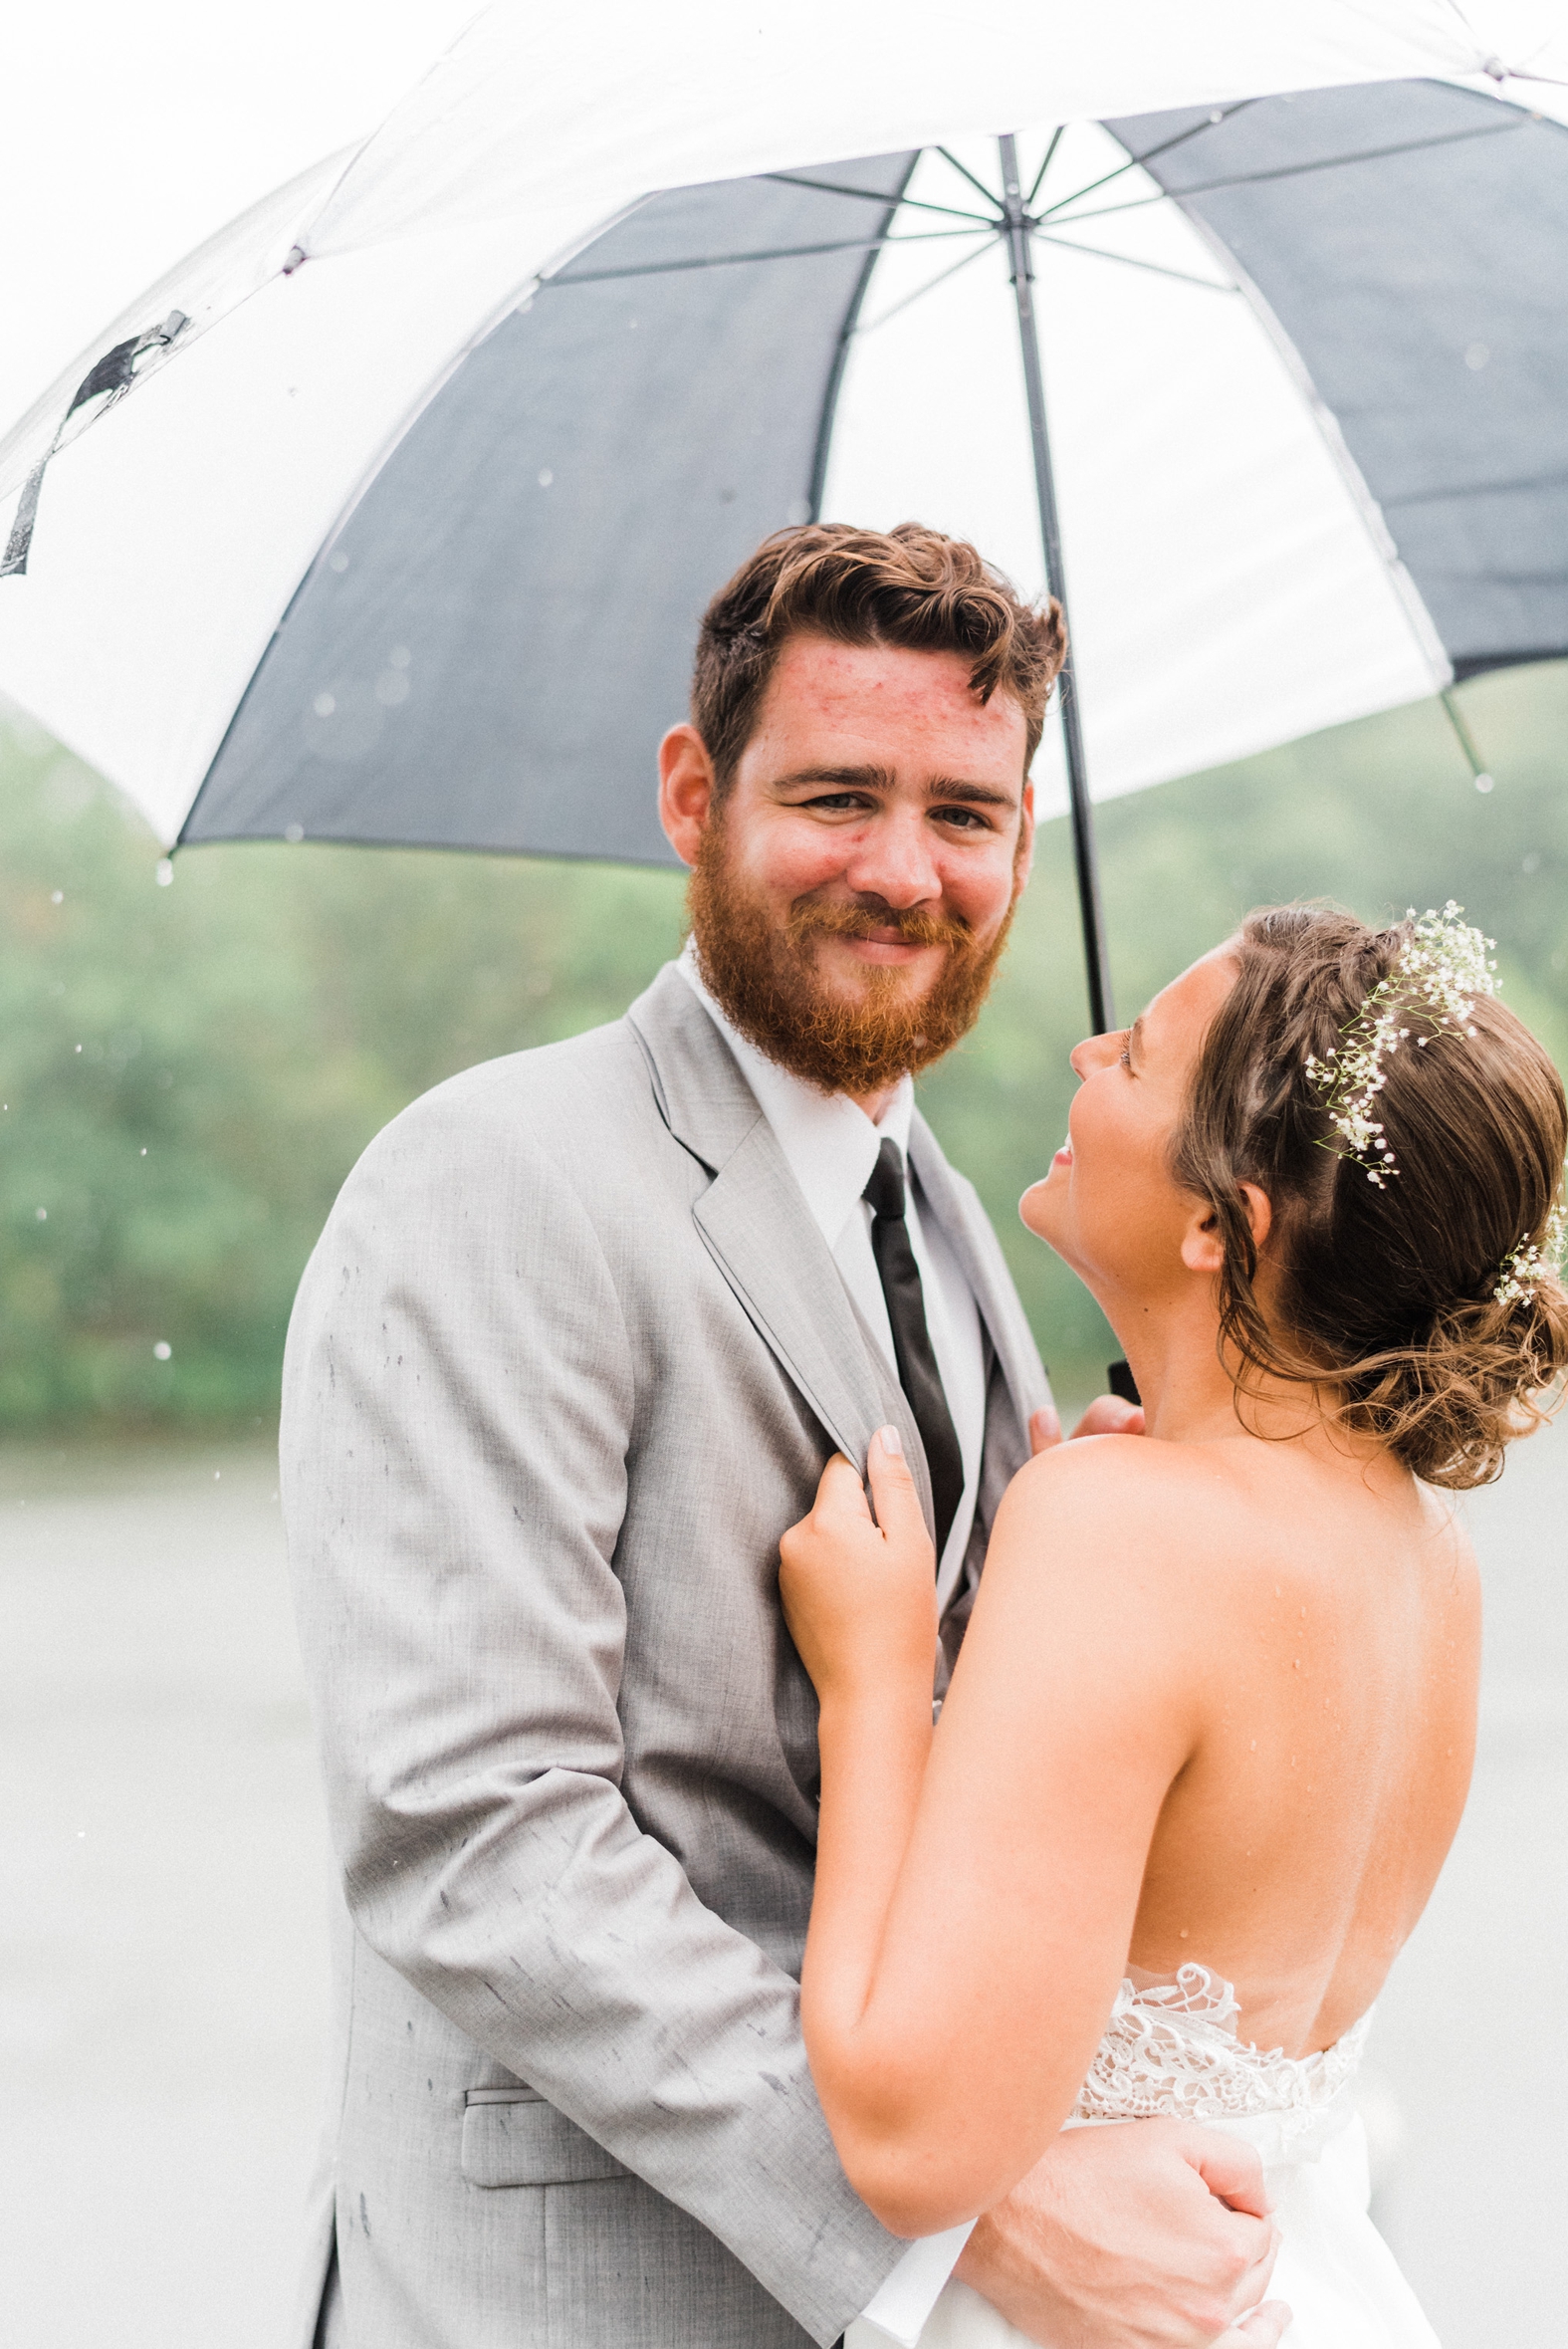 Bride and groom in rain with black and white umbrella. Groom in gray suit with black tie. Bride flower crown with baby's breath.